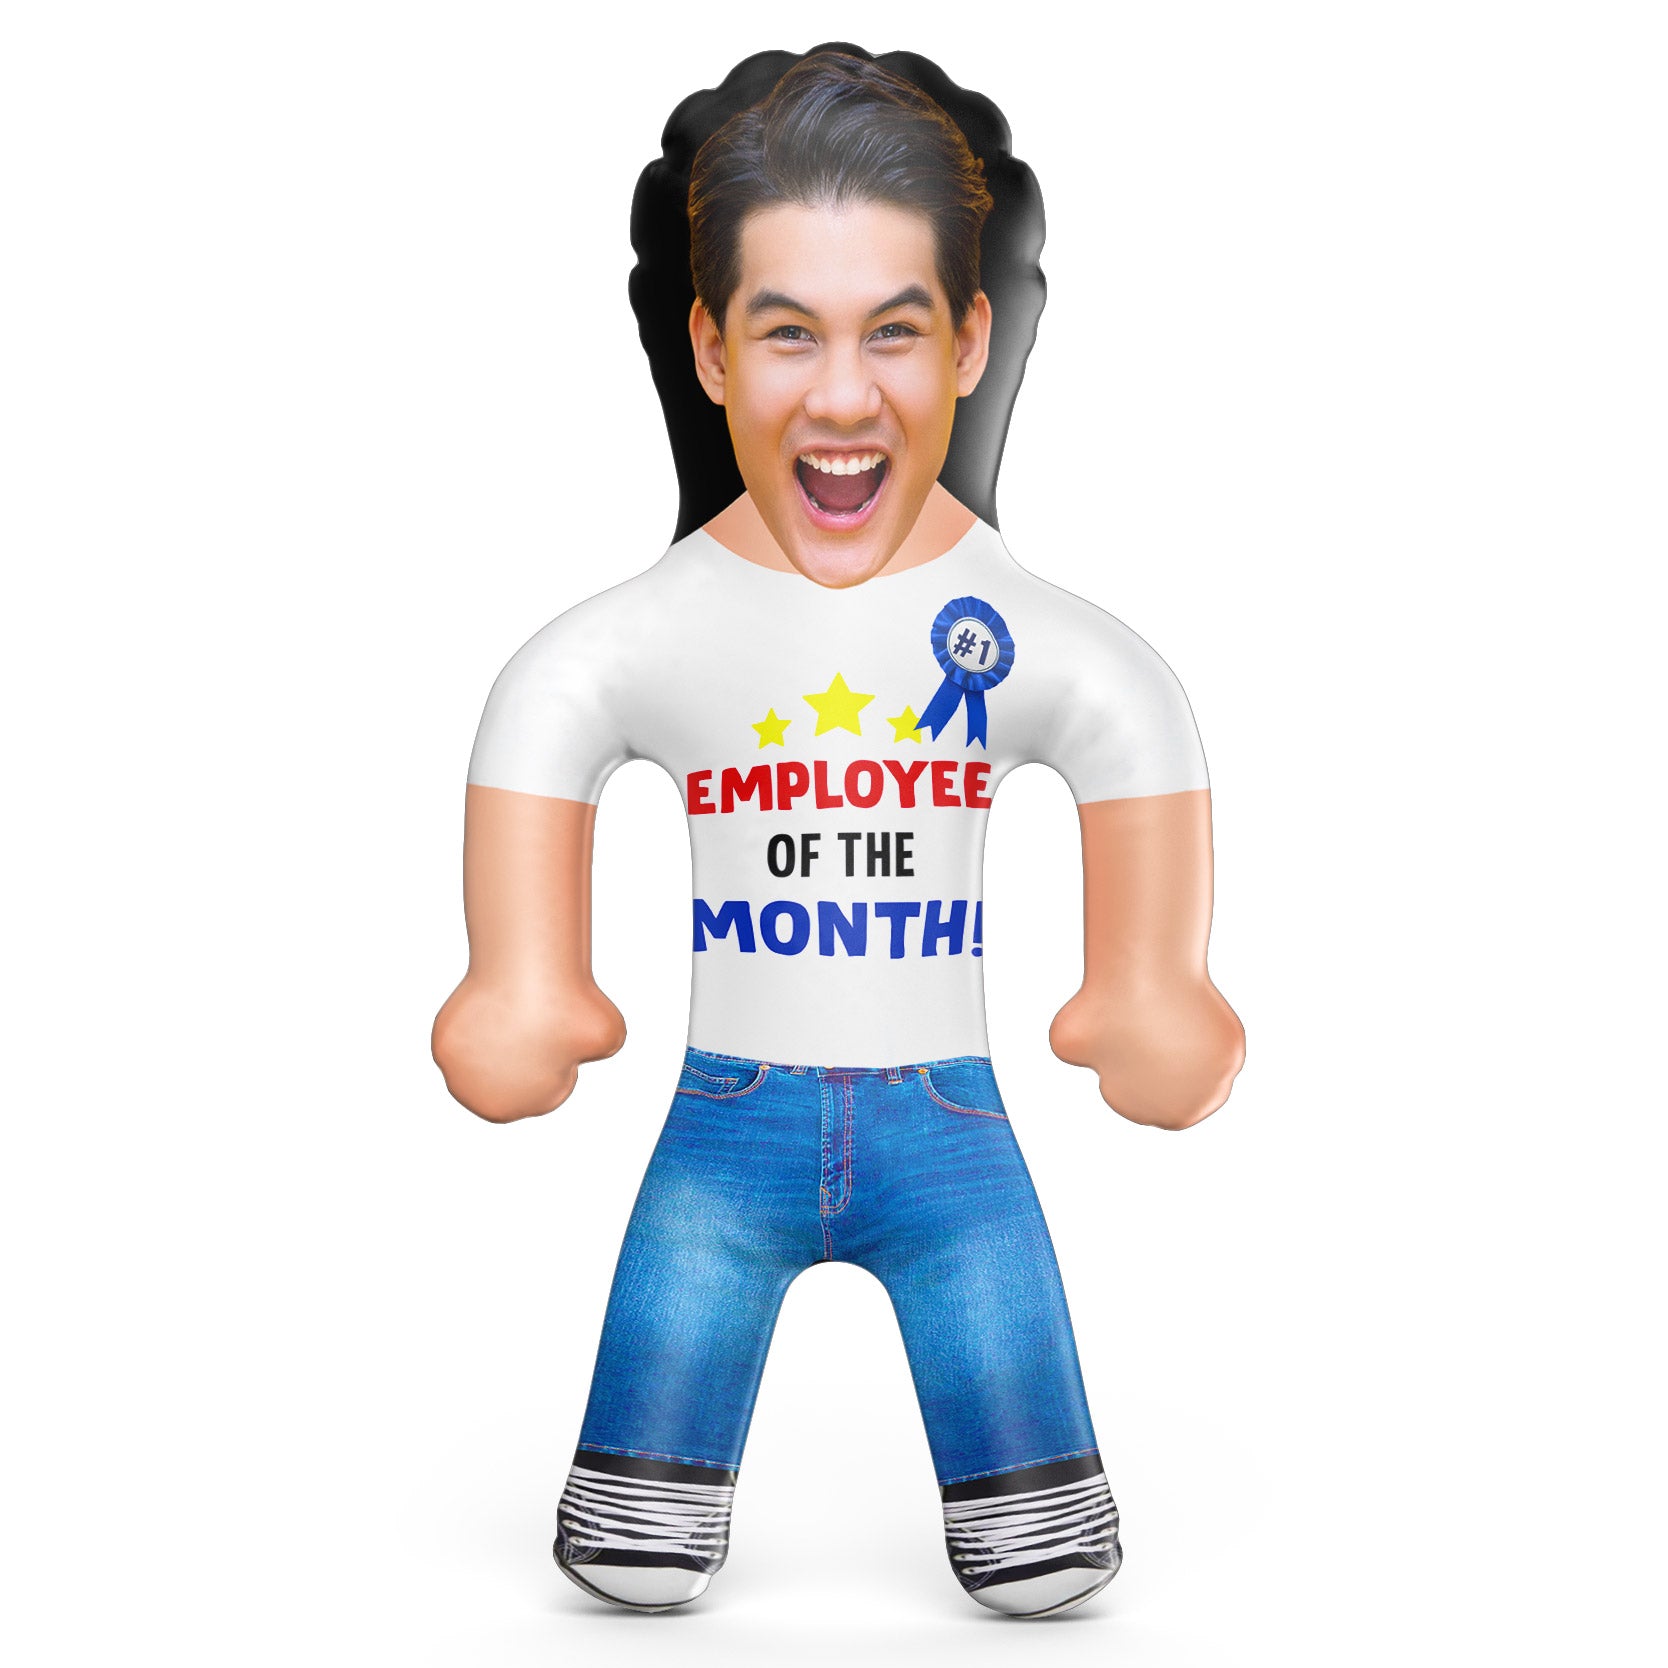 Employee of the Month Inflatable Doll